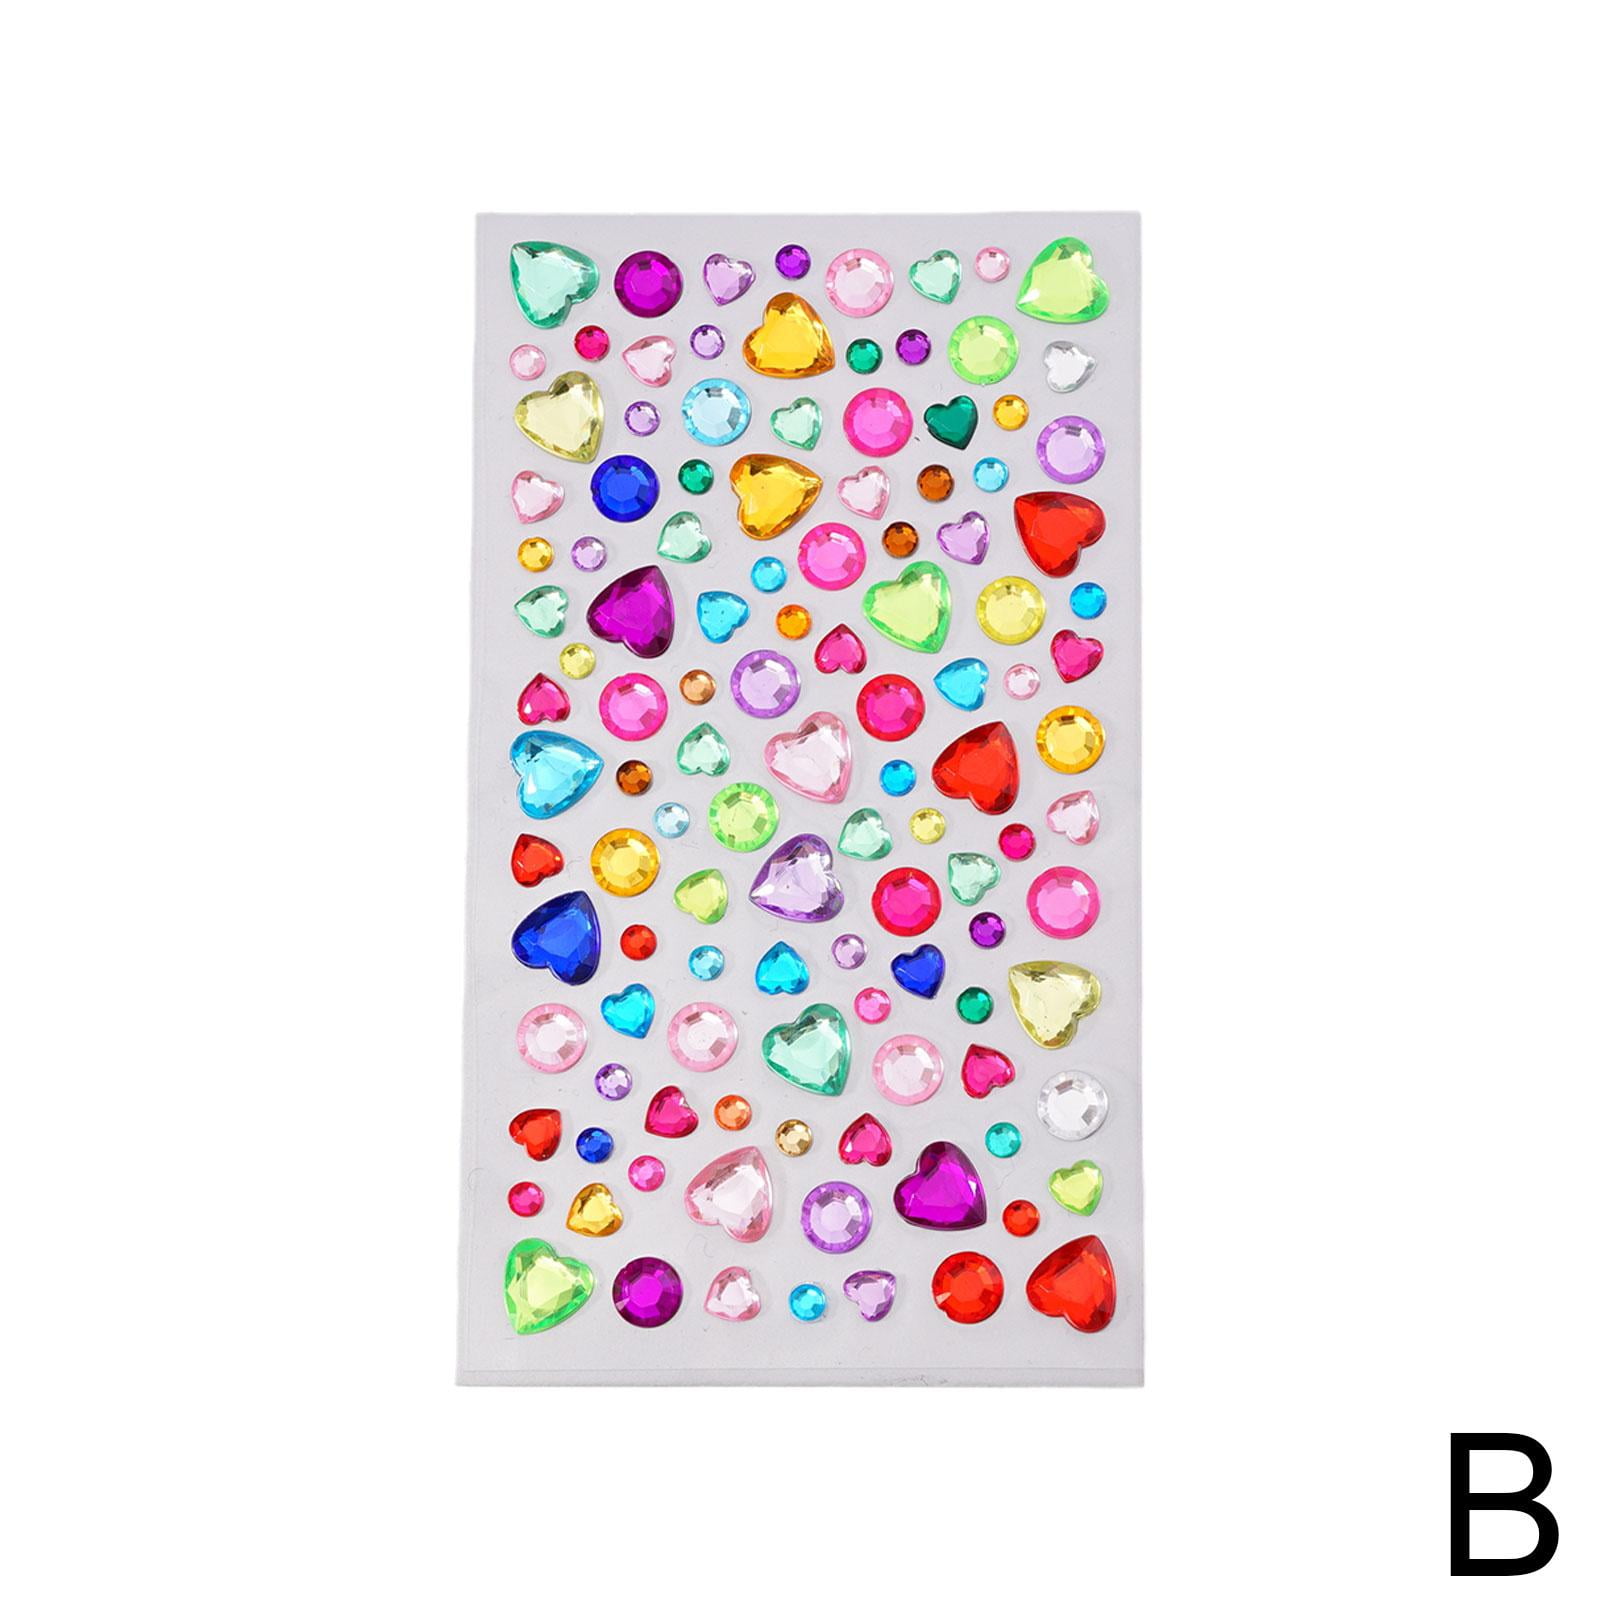 Creative Impressions Bits of Bling Gem Stickers See All Designs – Good's  Store Online